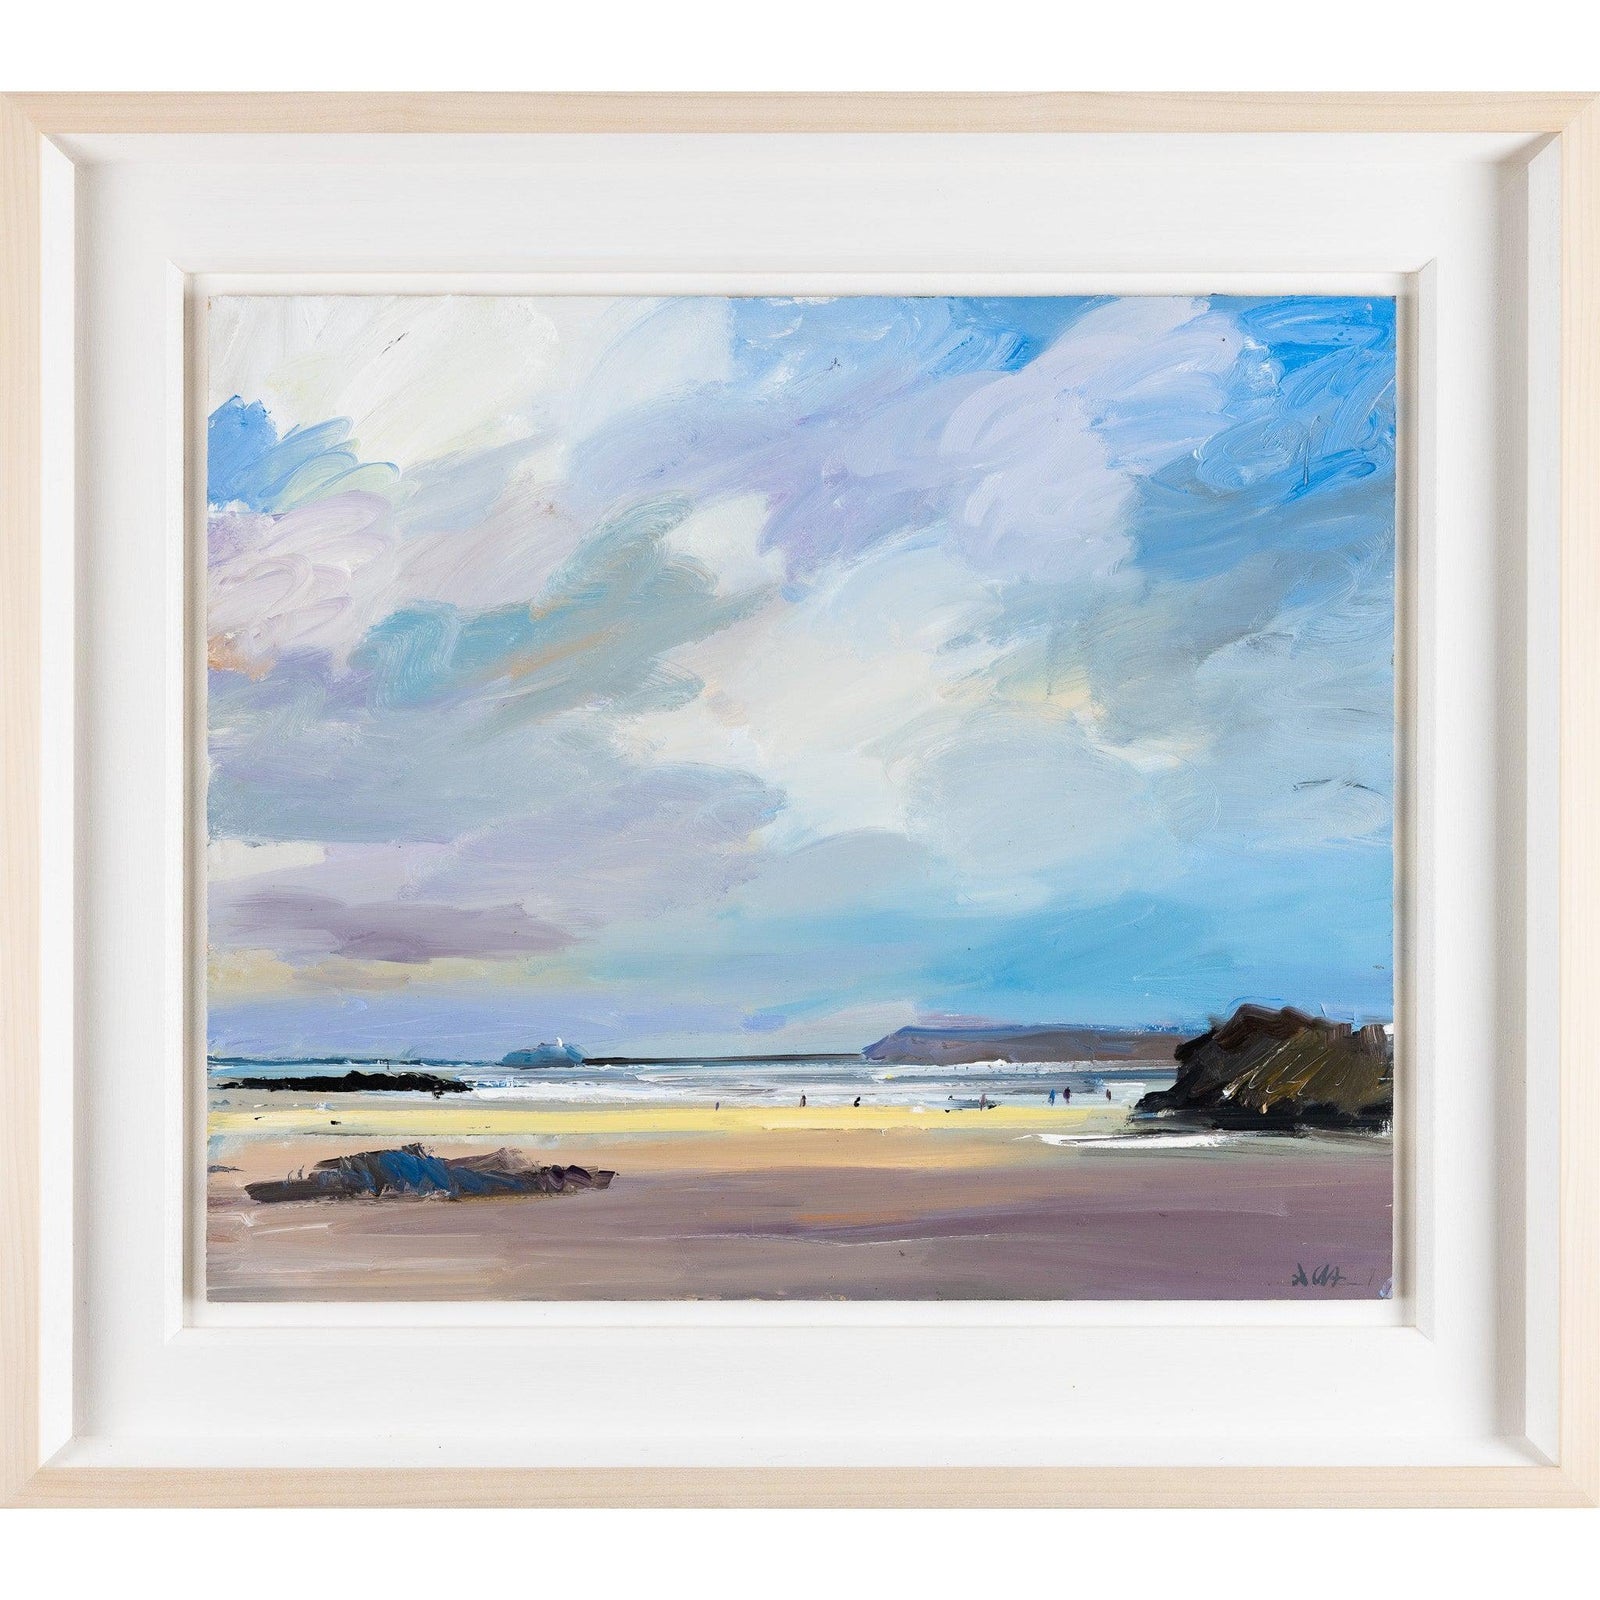 'Autumn Light, Godrevy' oil on board original by David Atkins, available at Padstow Gallery, Cornwall